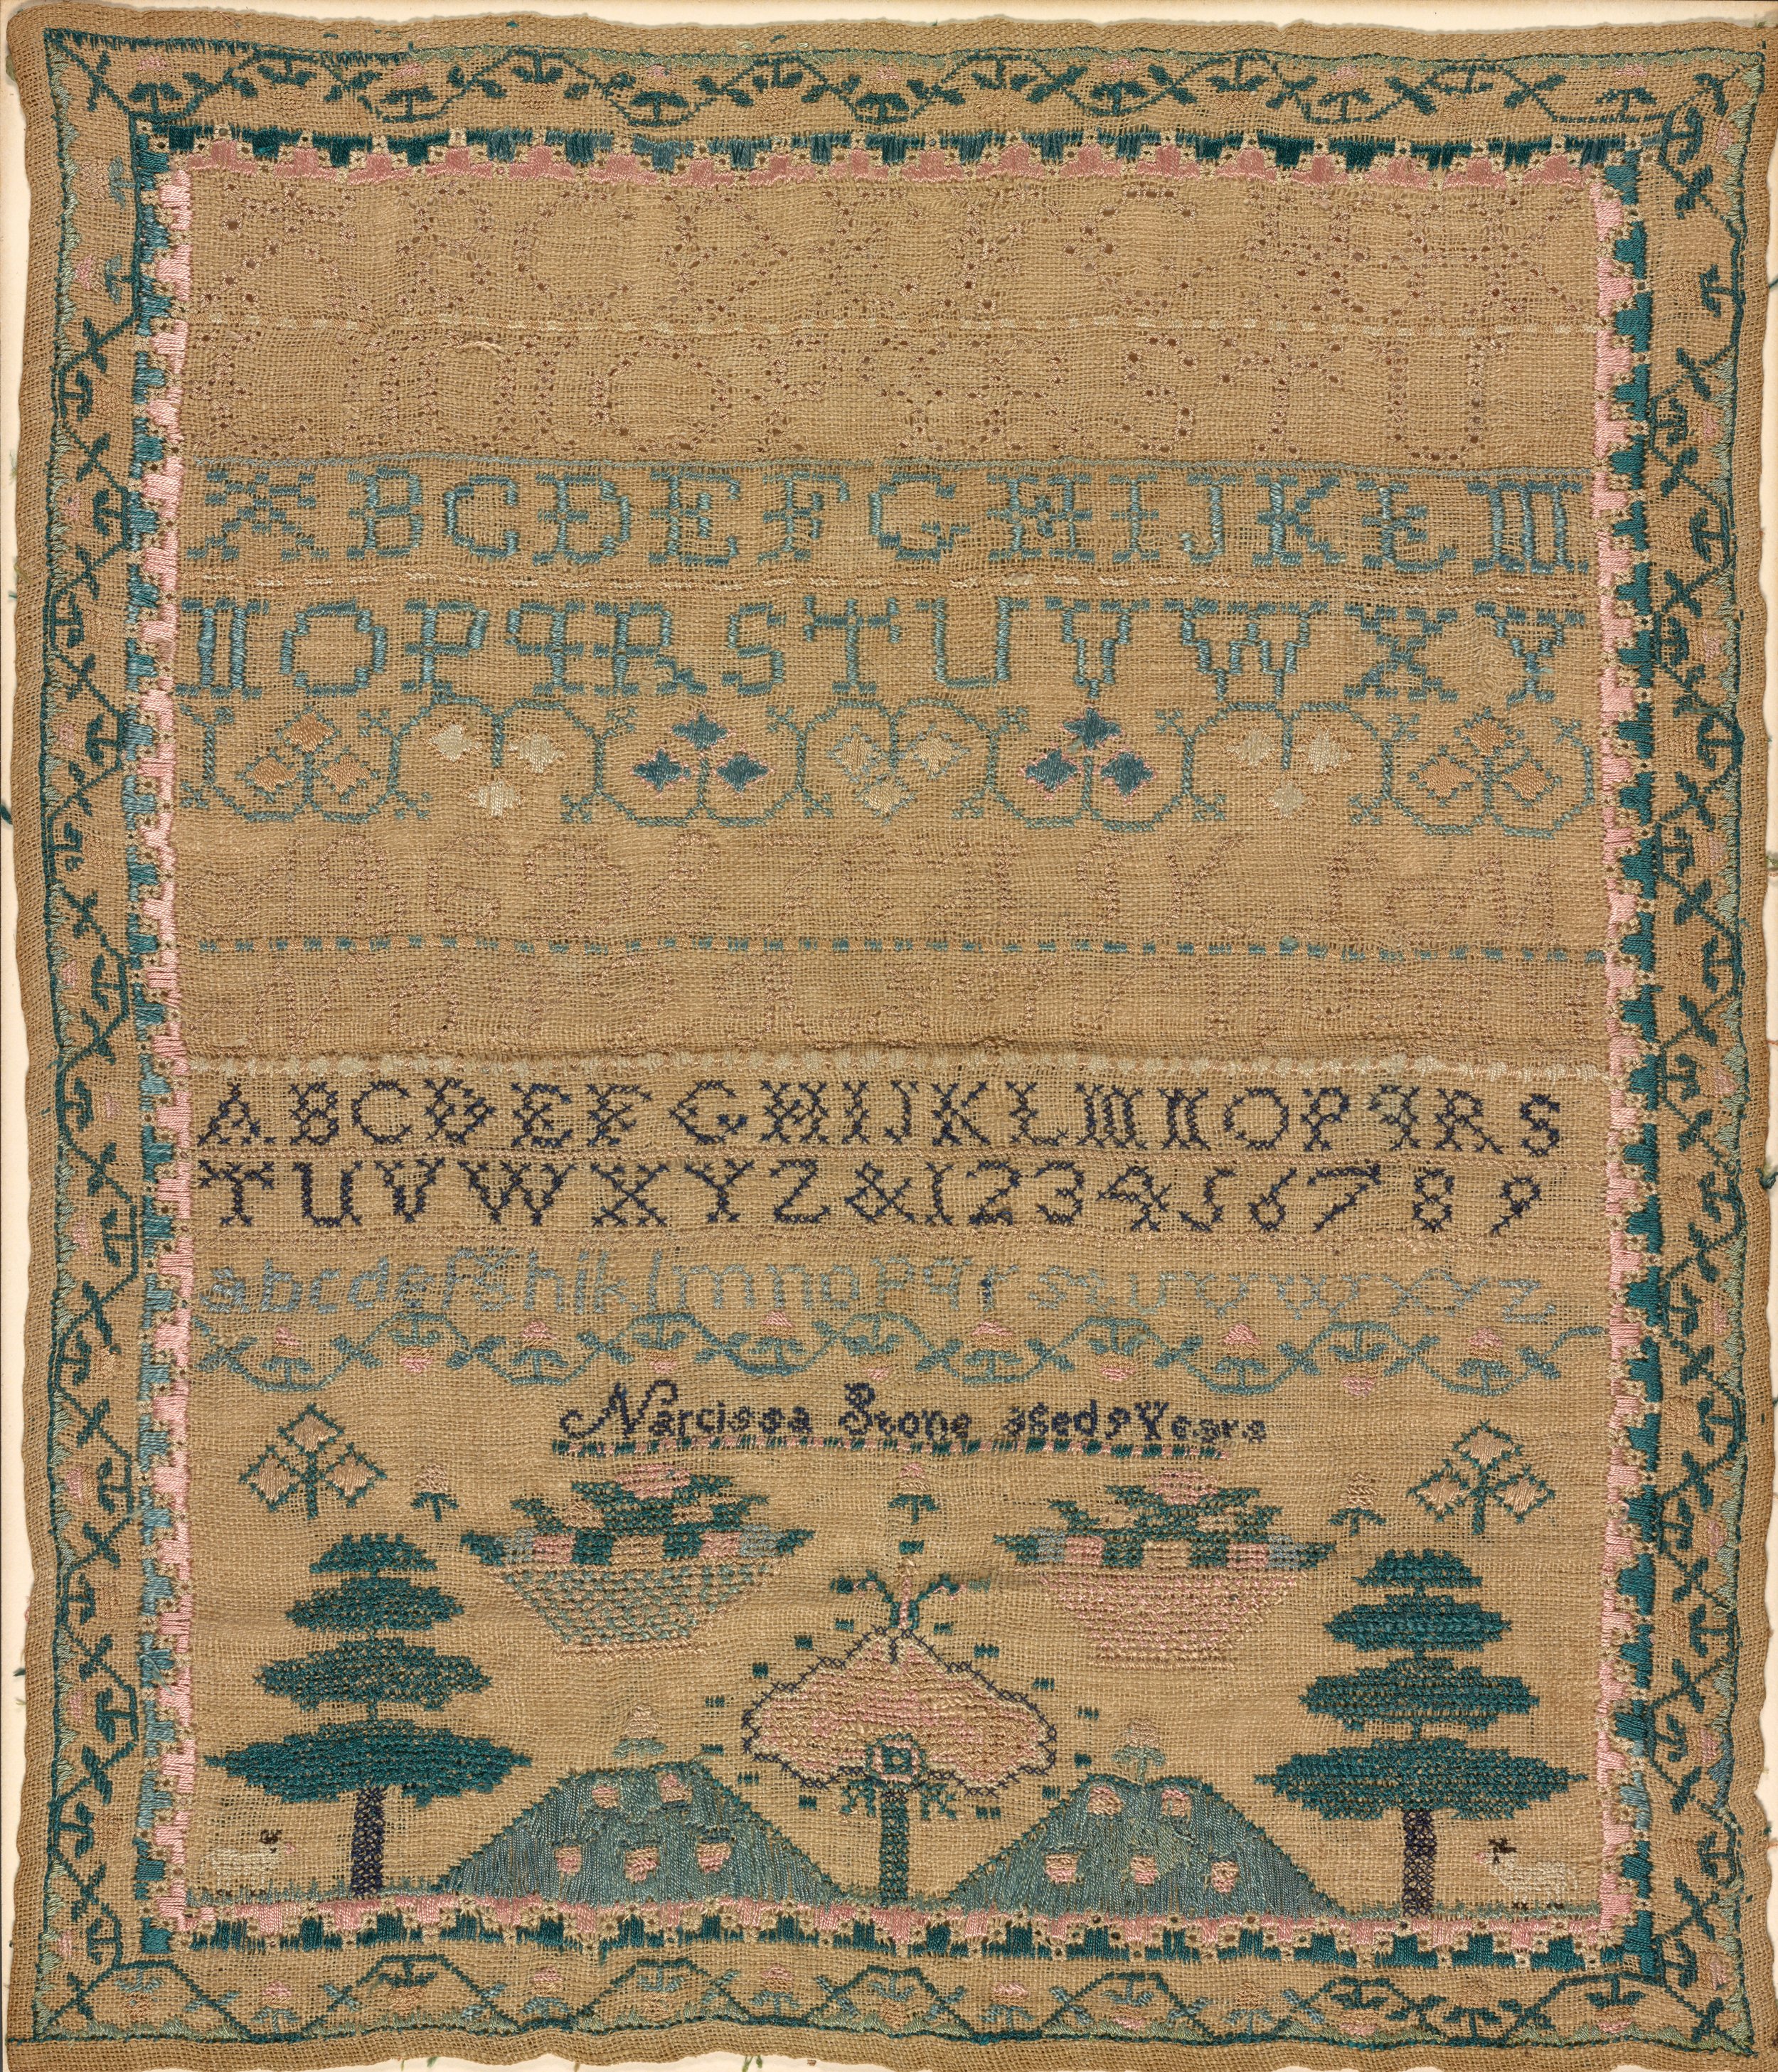   Narcissa Stone  United States, 1801–1877  Sampler , 1810 silk on linen, 16 3/8 x 18 7/8 inches Museum purchase, 1973.9 